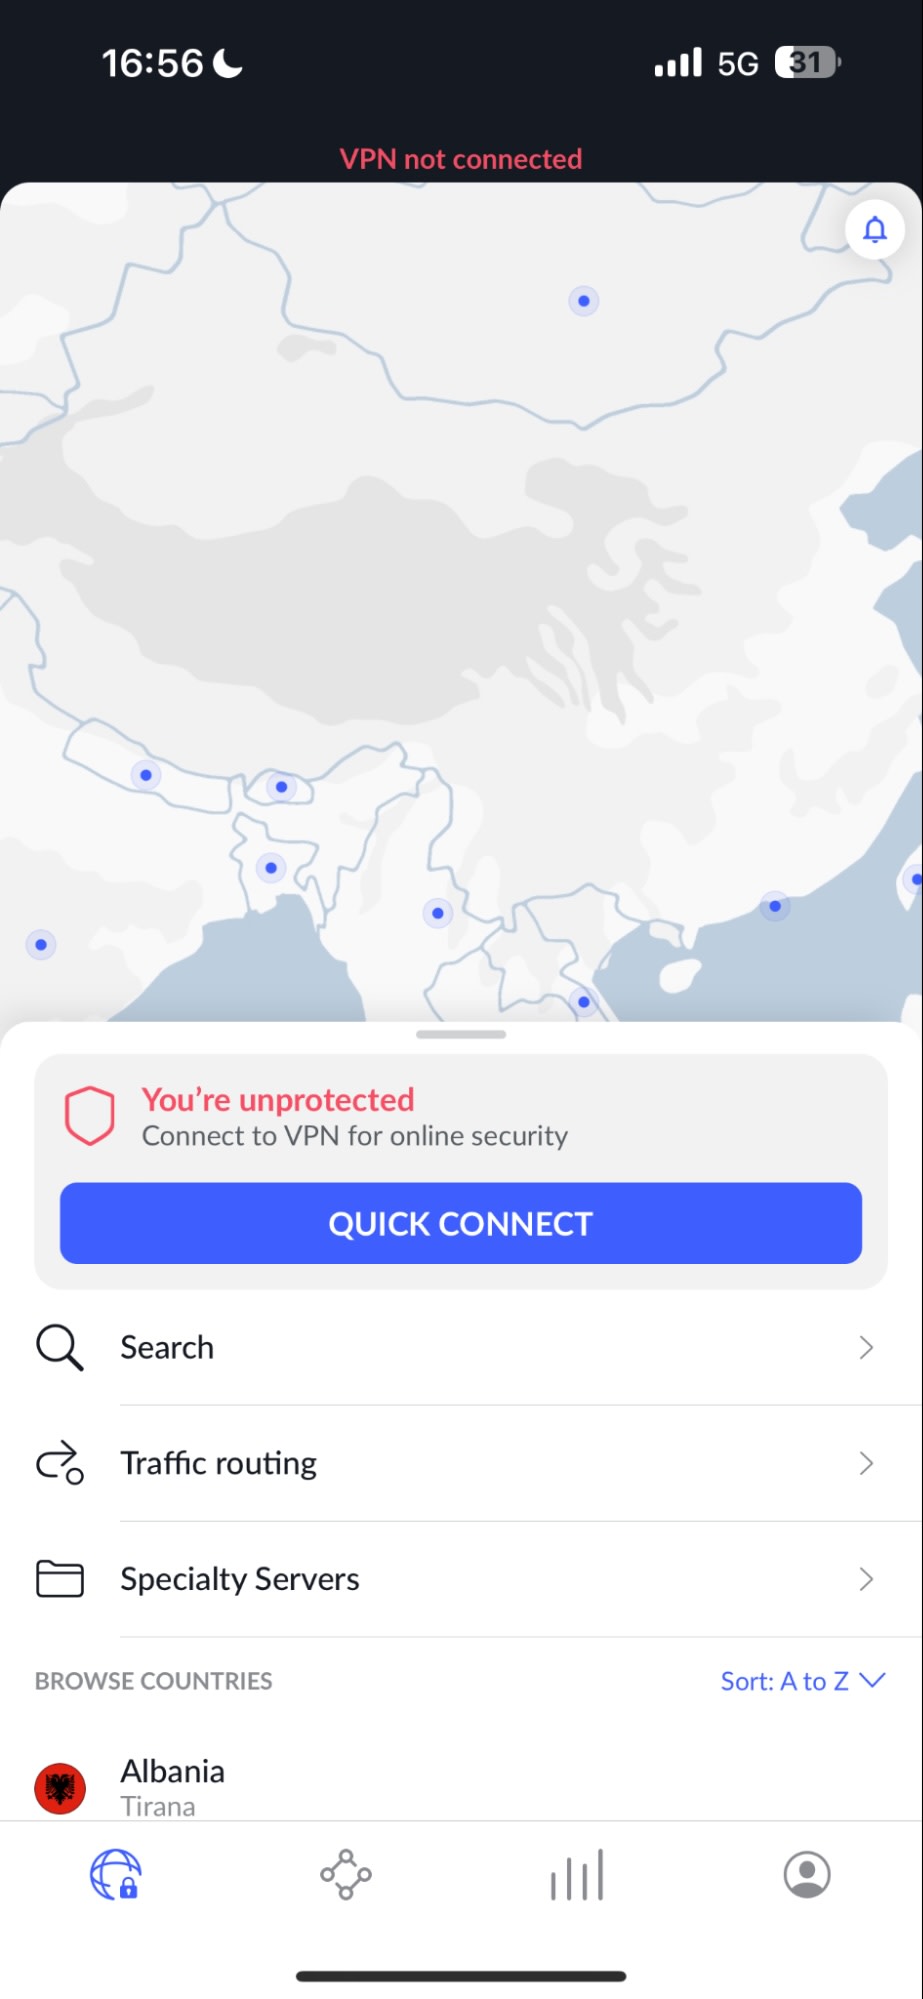 NordVPN's connection page